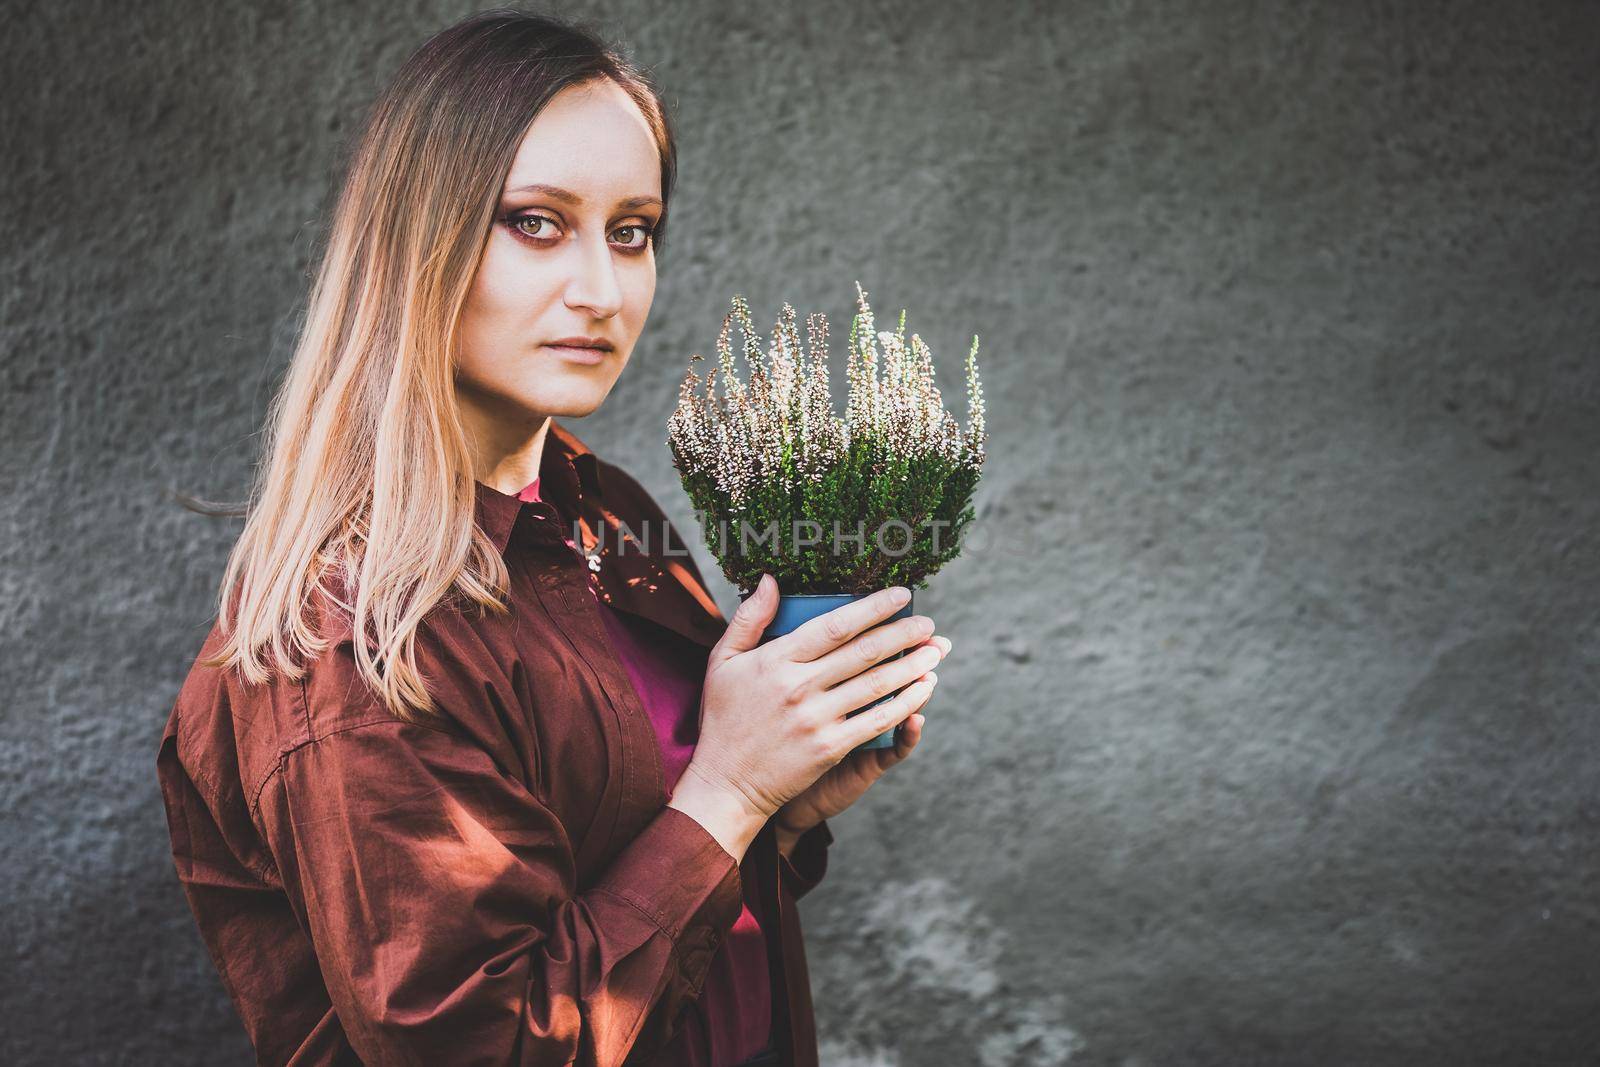 White woman holding a pot with white heather in her hands. Home gardening, house decoration with seasonal fall plants.